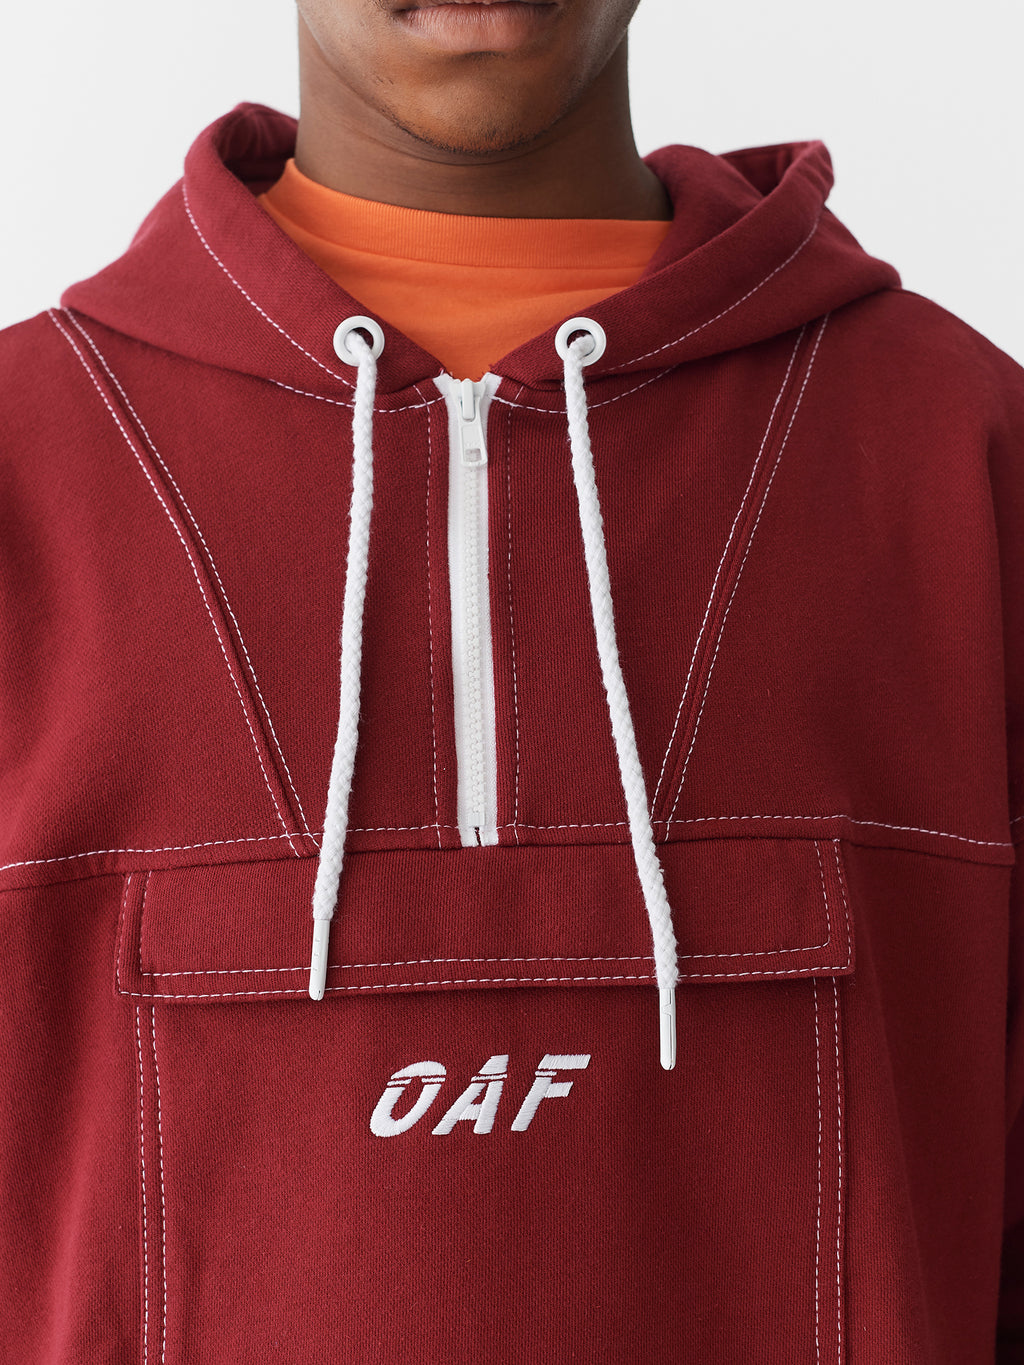 Lazy Oaf Stitched Up Maroon Hoodie